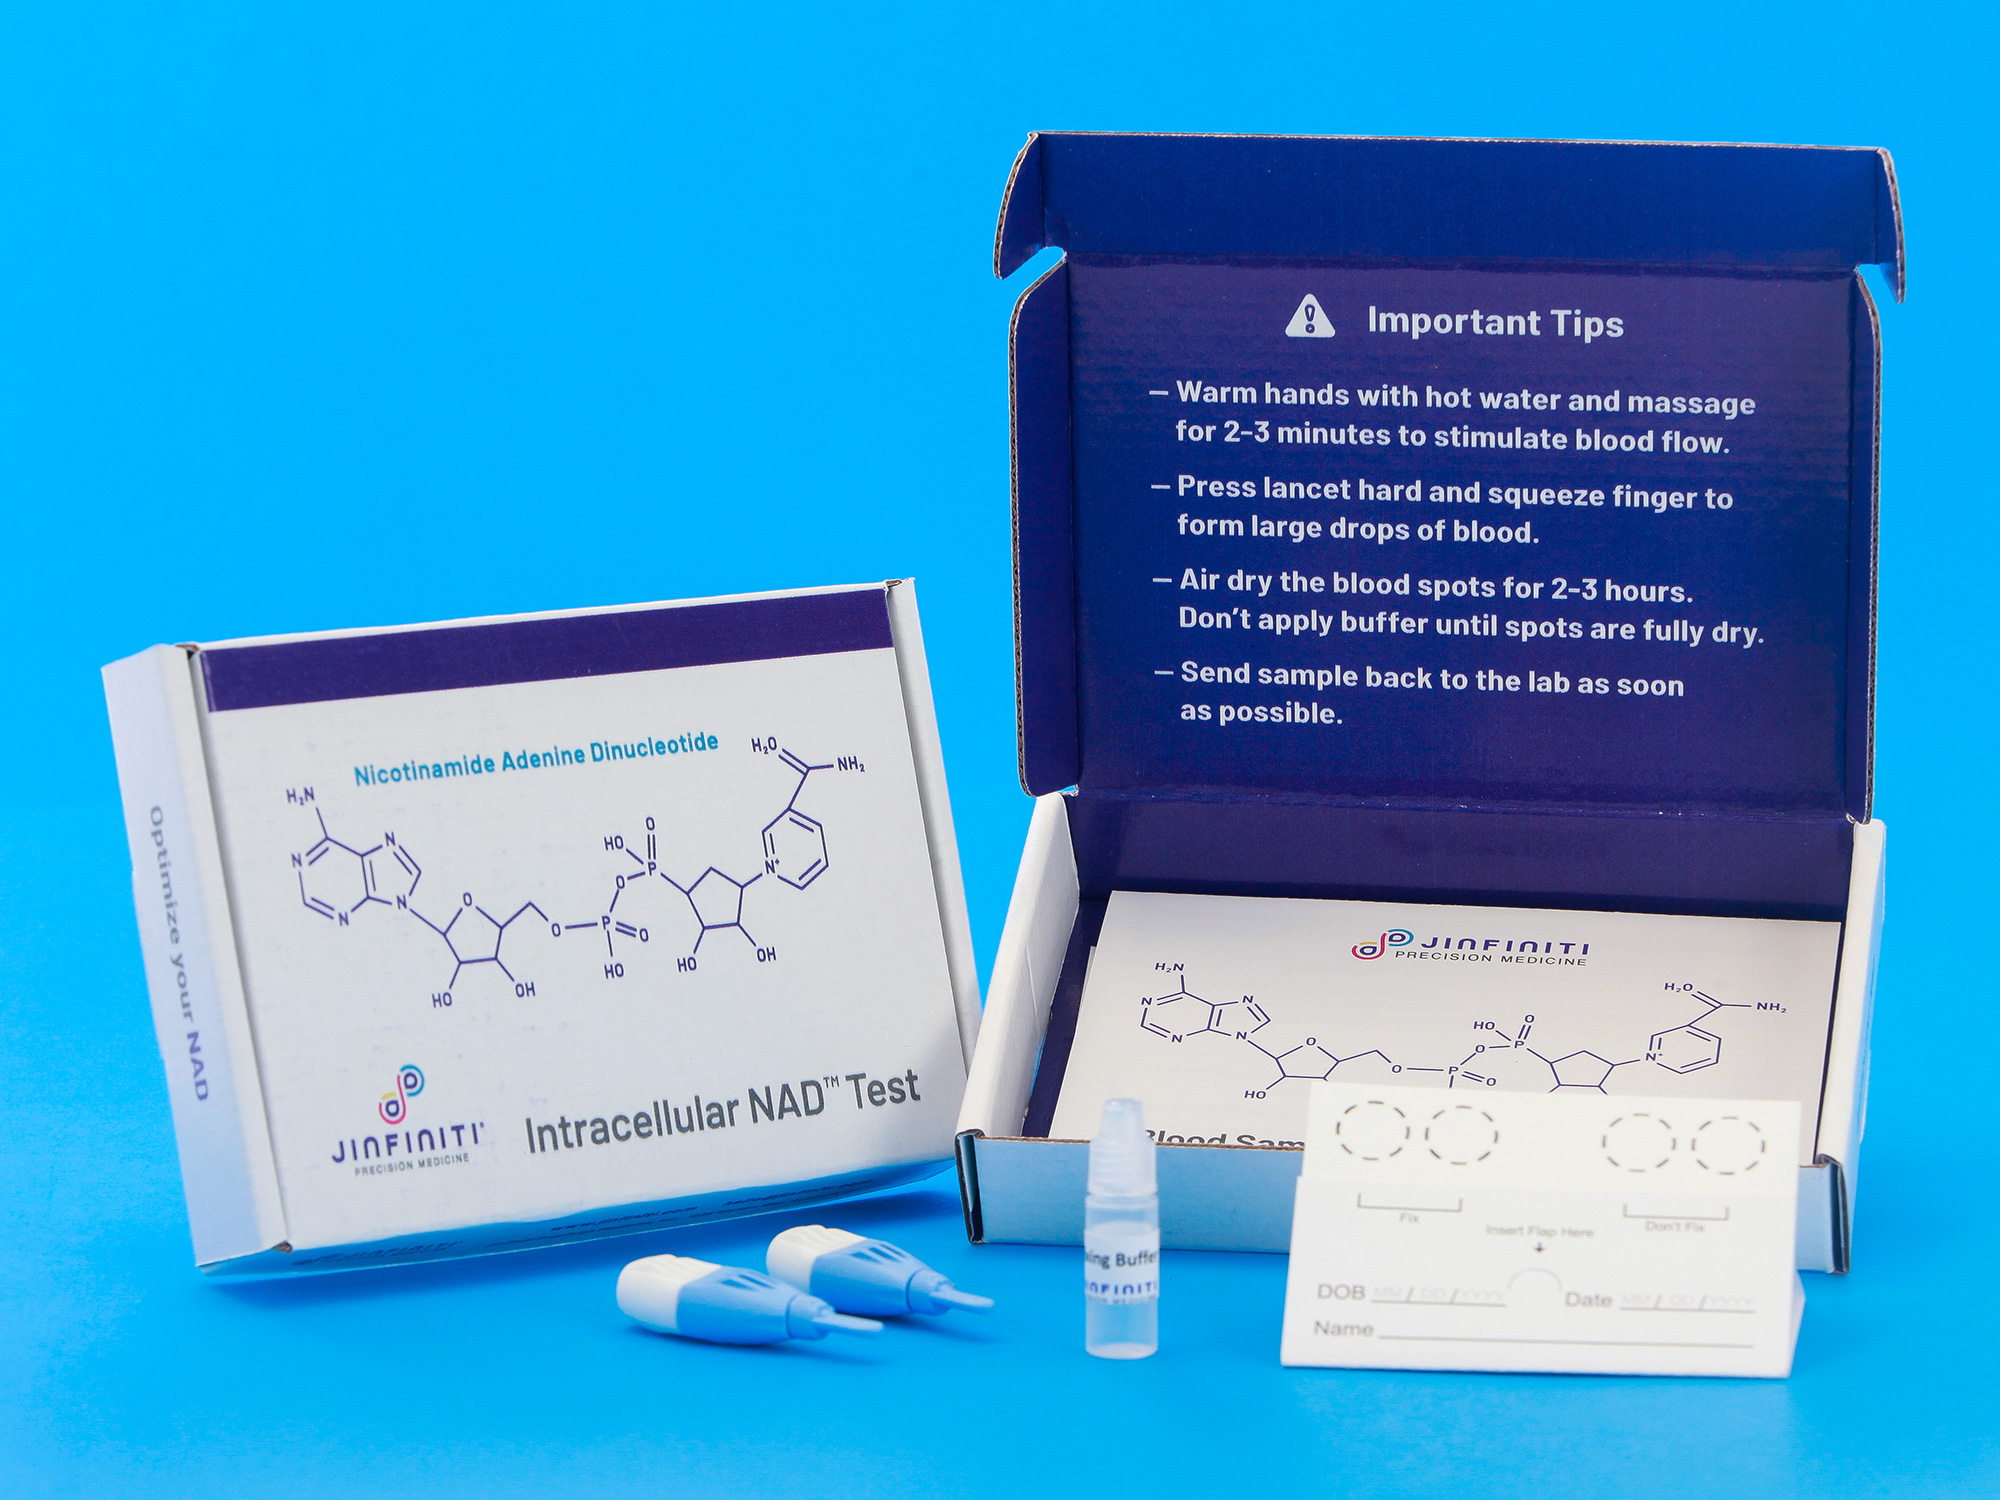 j infiniti, nad test, The Jinfiniti Intracellular NAD® Test is a finger prick sample collection test that measures NAD levels to provide actionable data to help individuals optimize their cellular health.